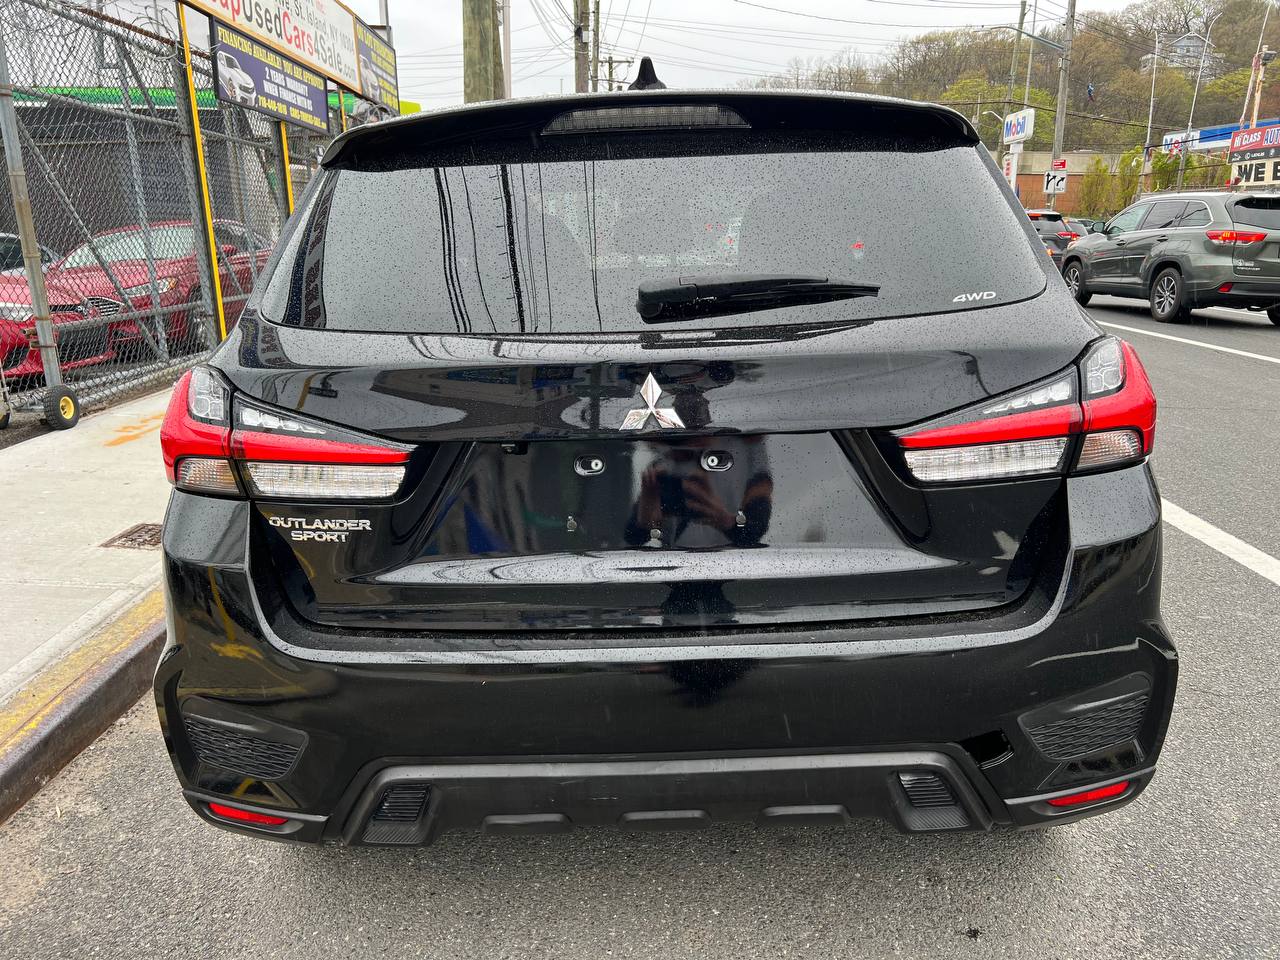 Used - Mitsubishi Outlander Sport ES AWD Wagon for sale in Staten Island NY